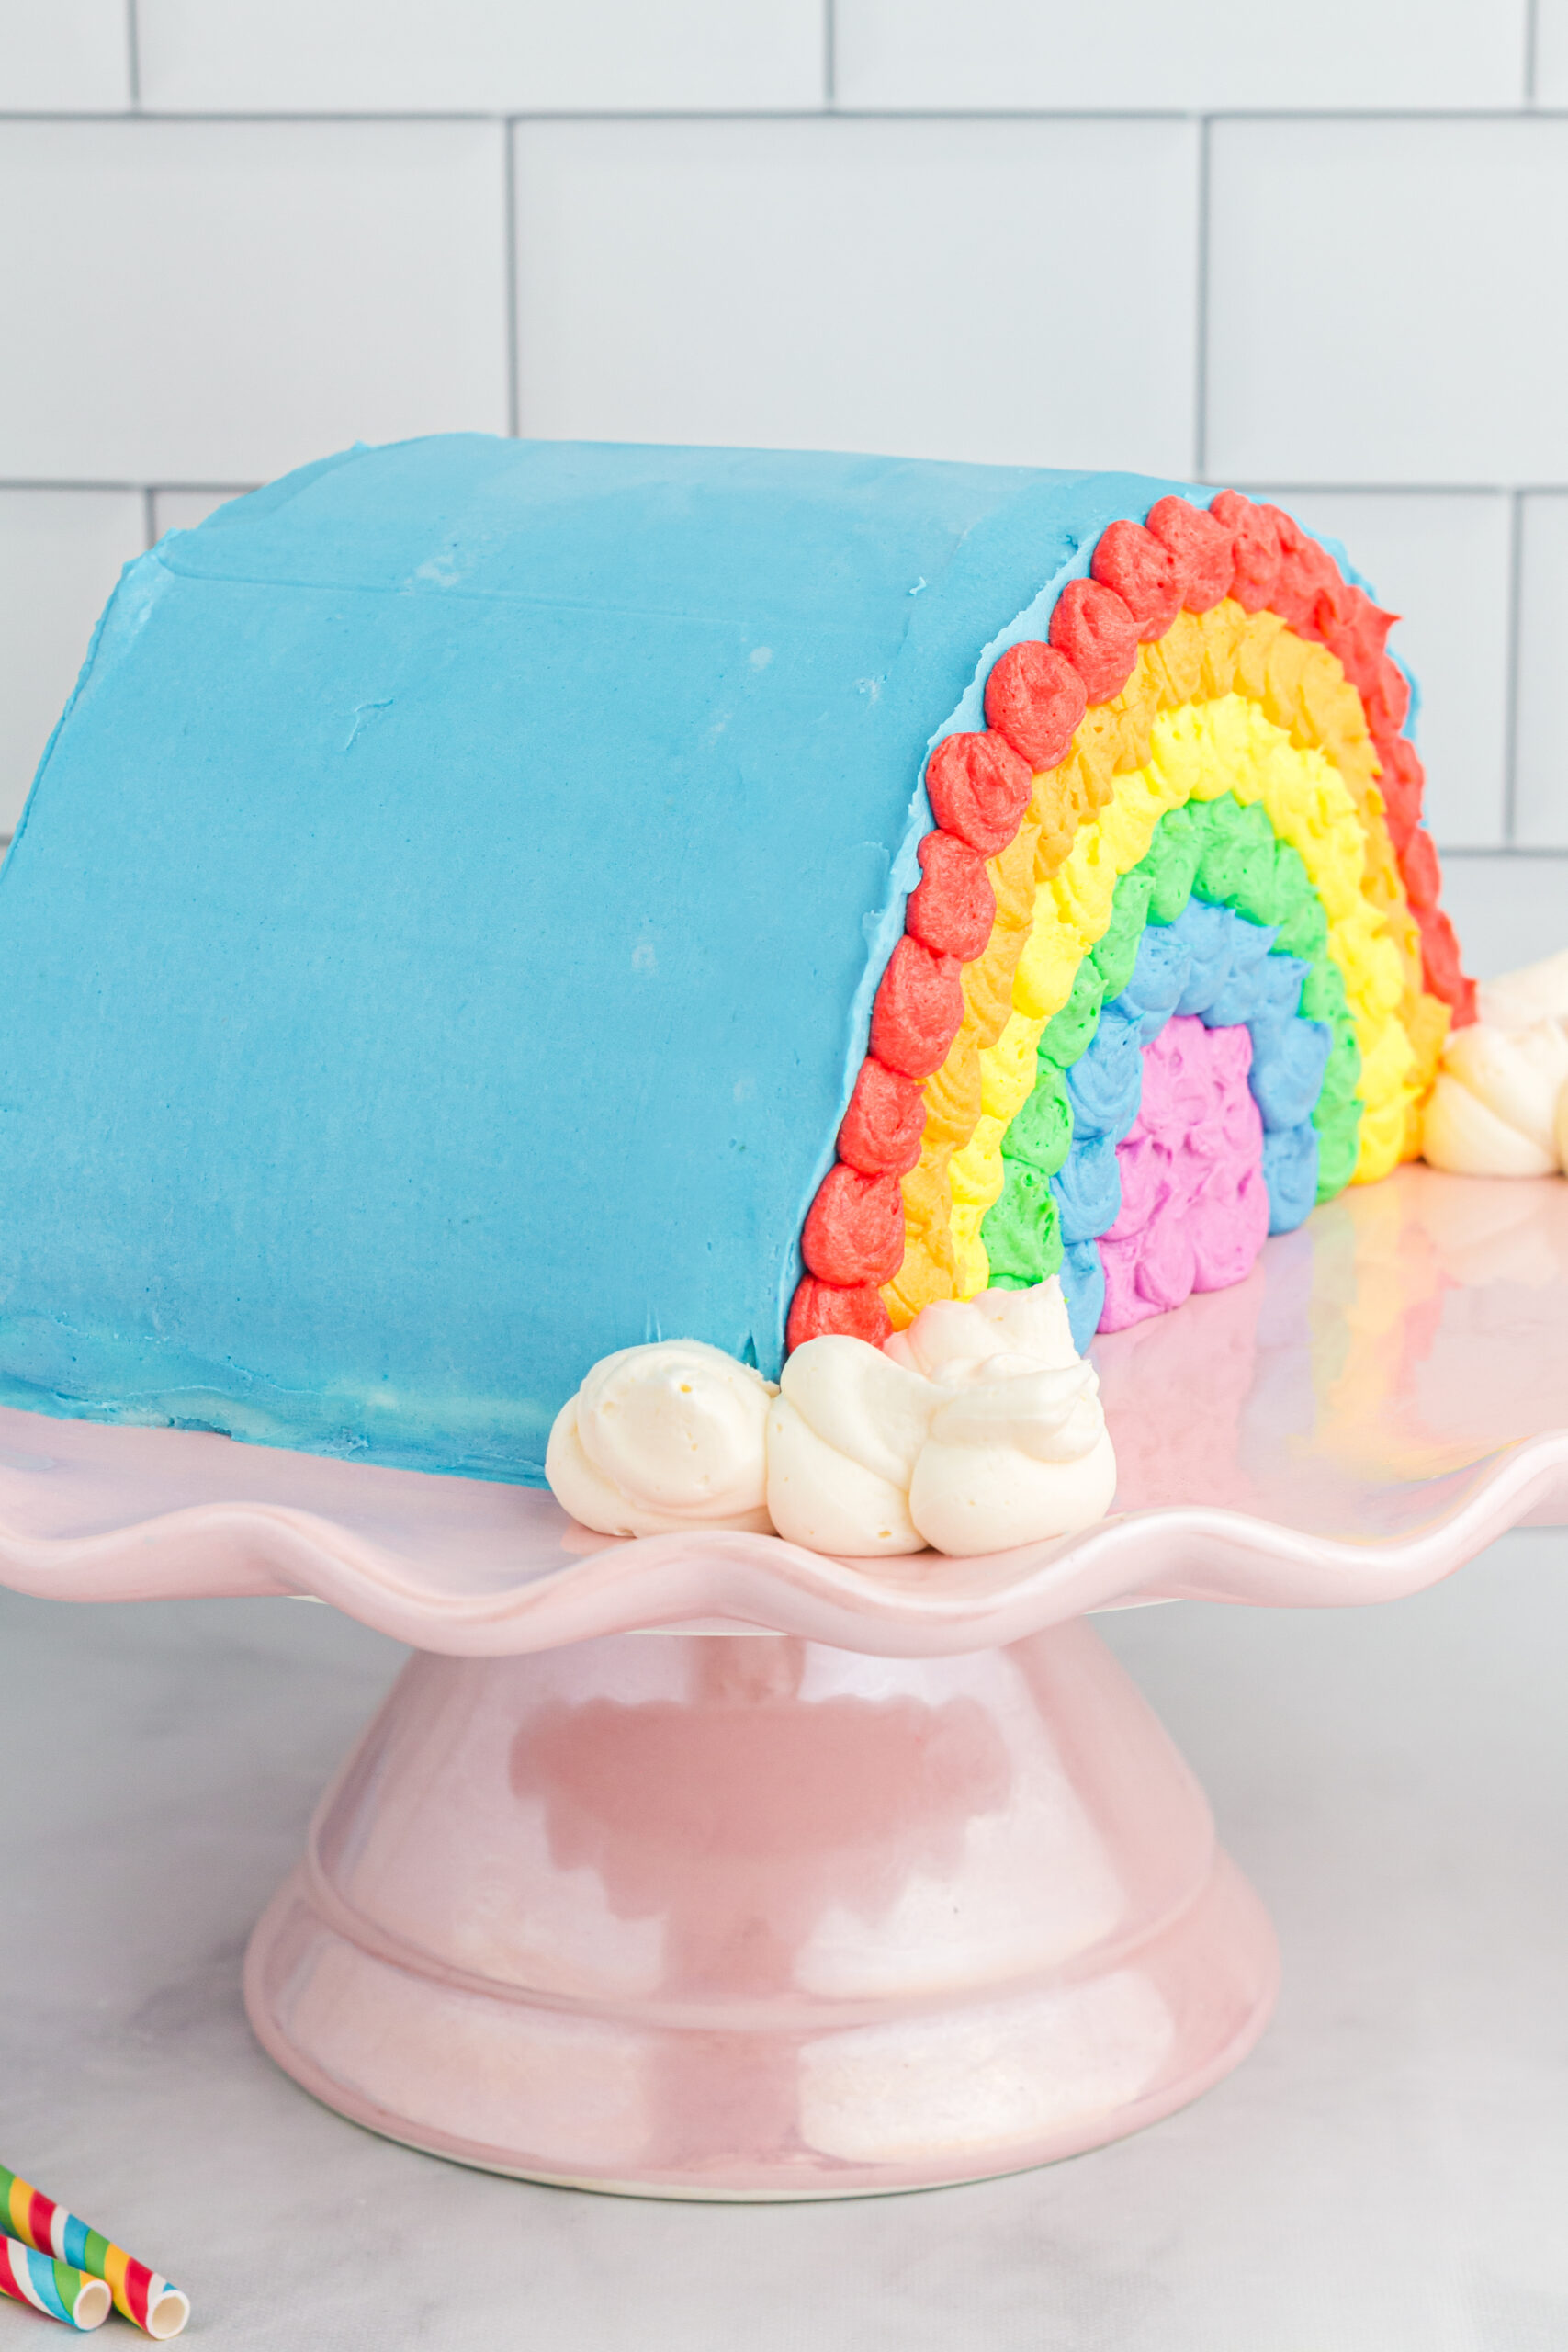 side view of pretty rainbow decorated cake on a pink cake stand.